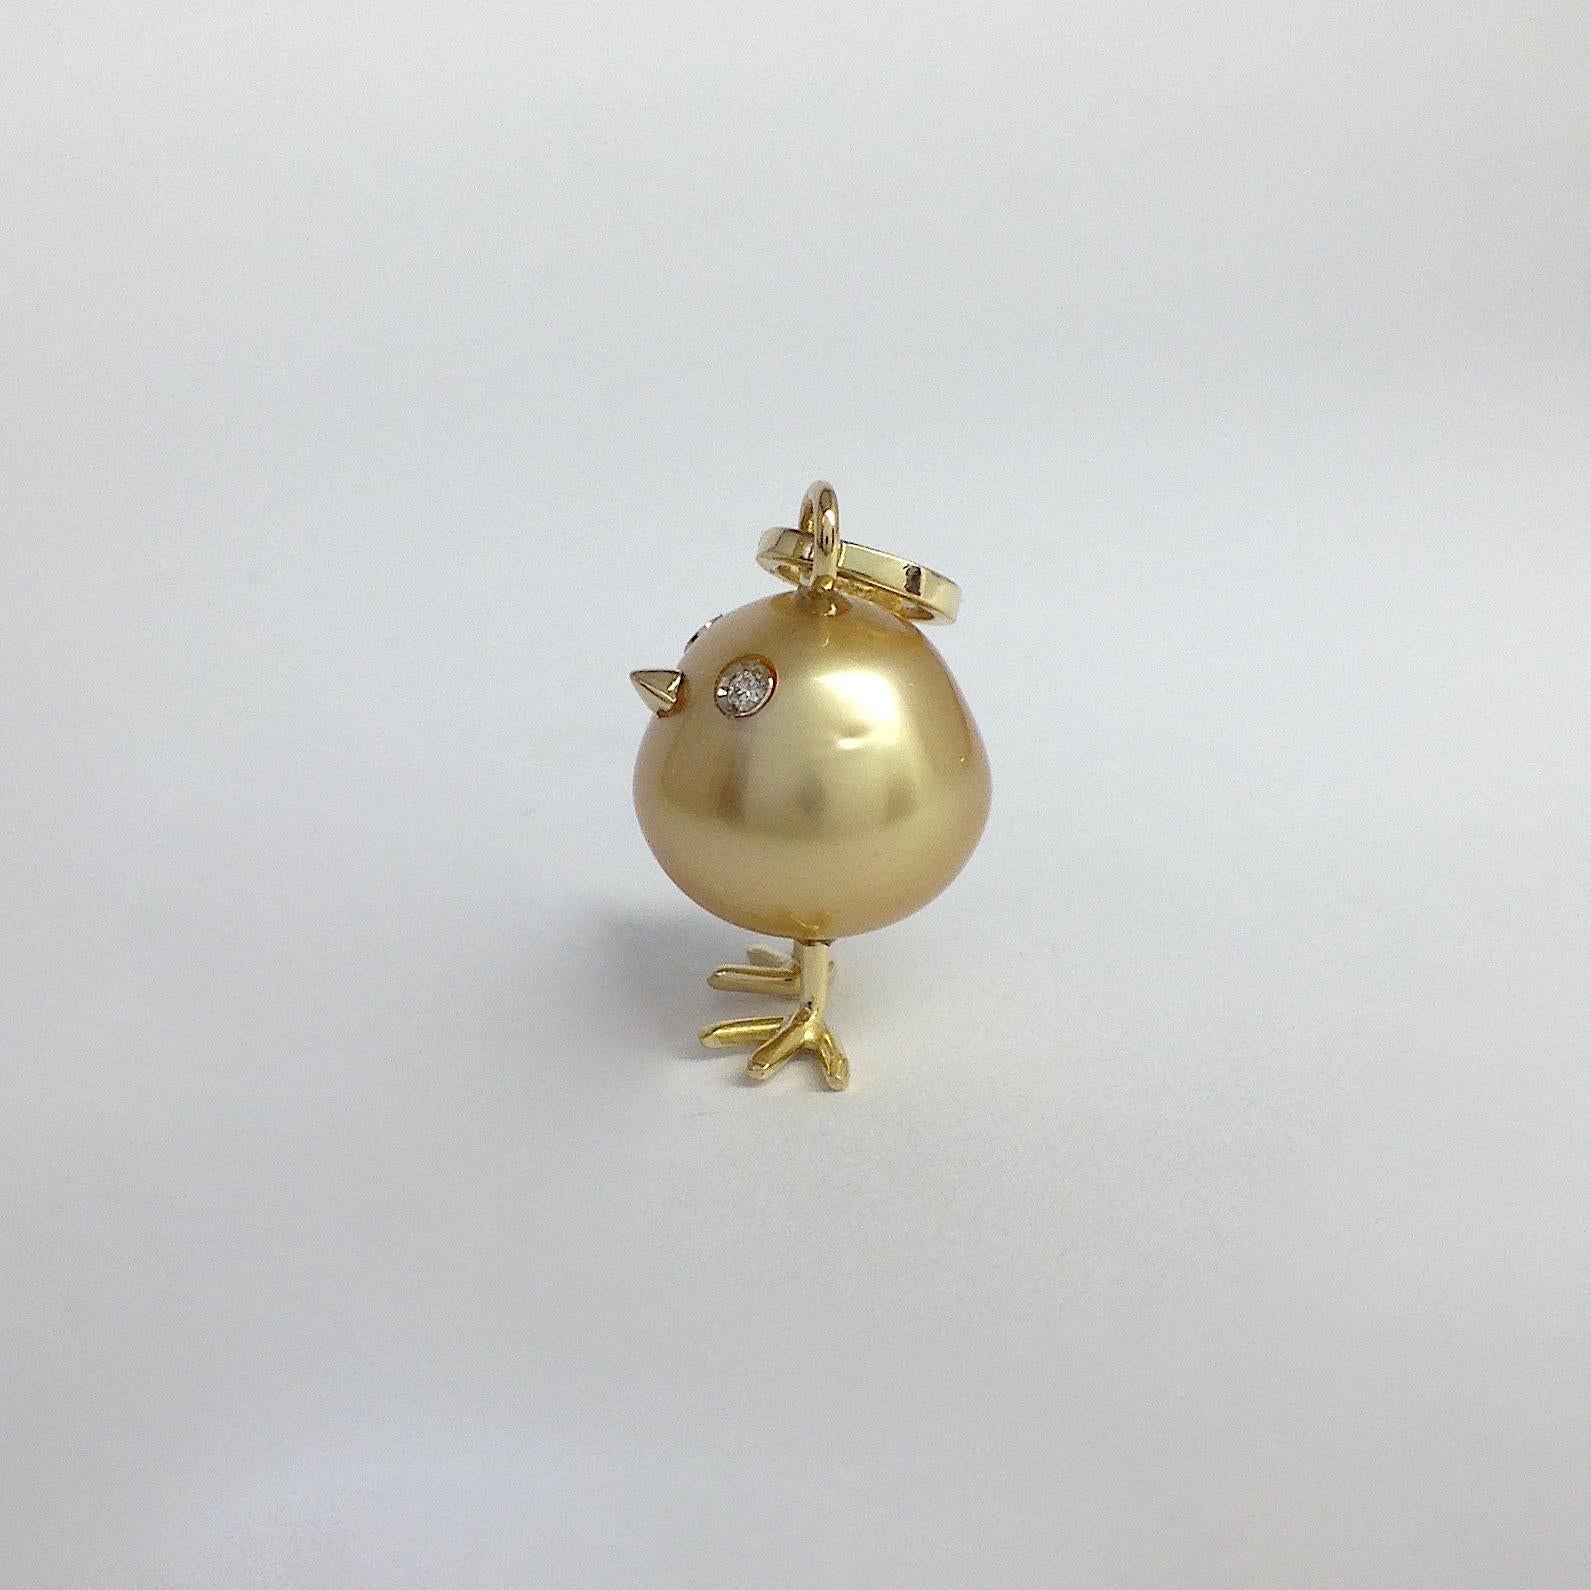 A oval shape Australian pearl has been carefully crafted to make a chick. He has his two legs, two eyes encrusted with two white diamonds and his beak. 
The gold is yellow.
The chain is not included
The caliber is ct 0.015.
The size of pearl is